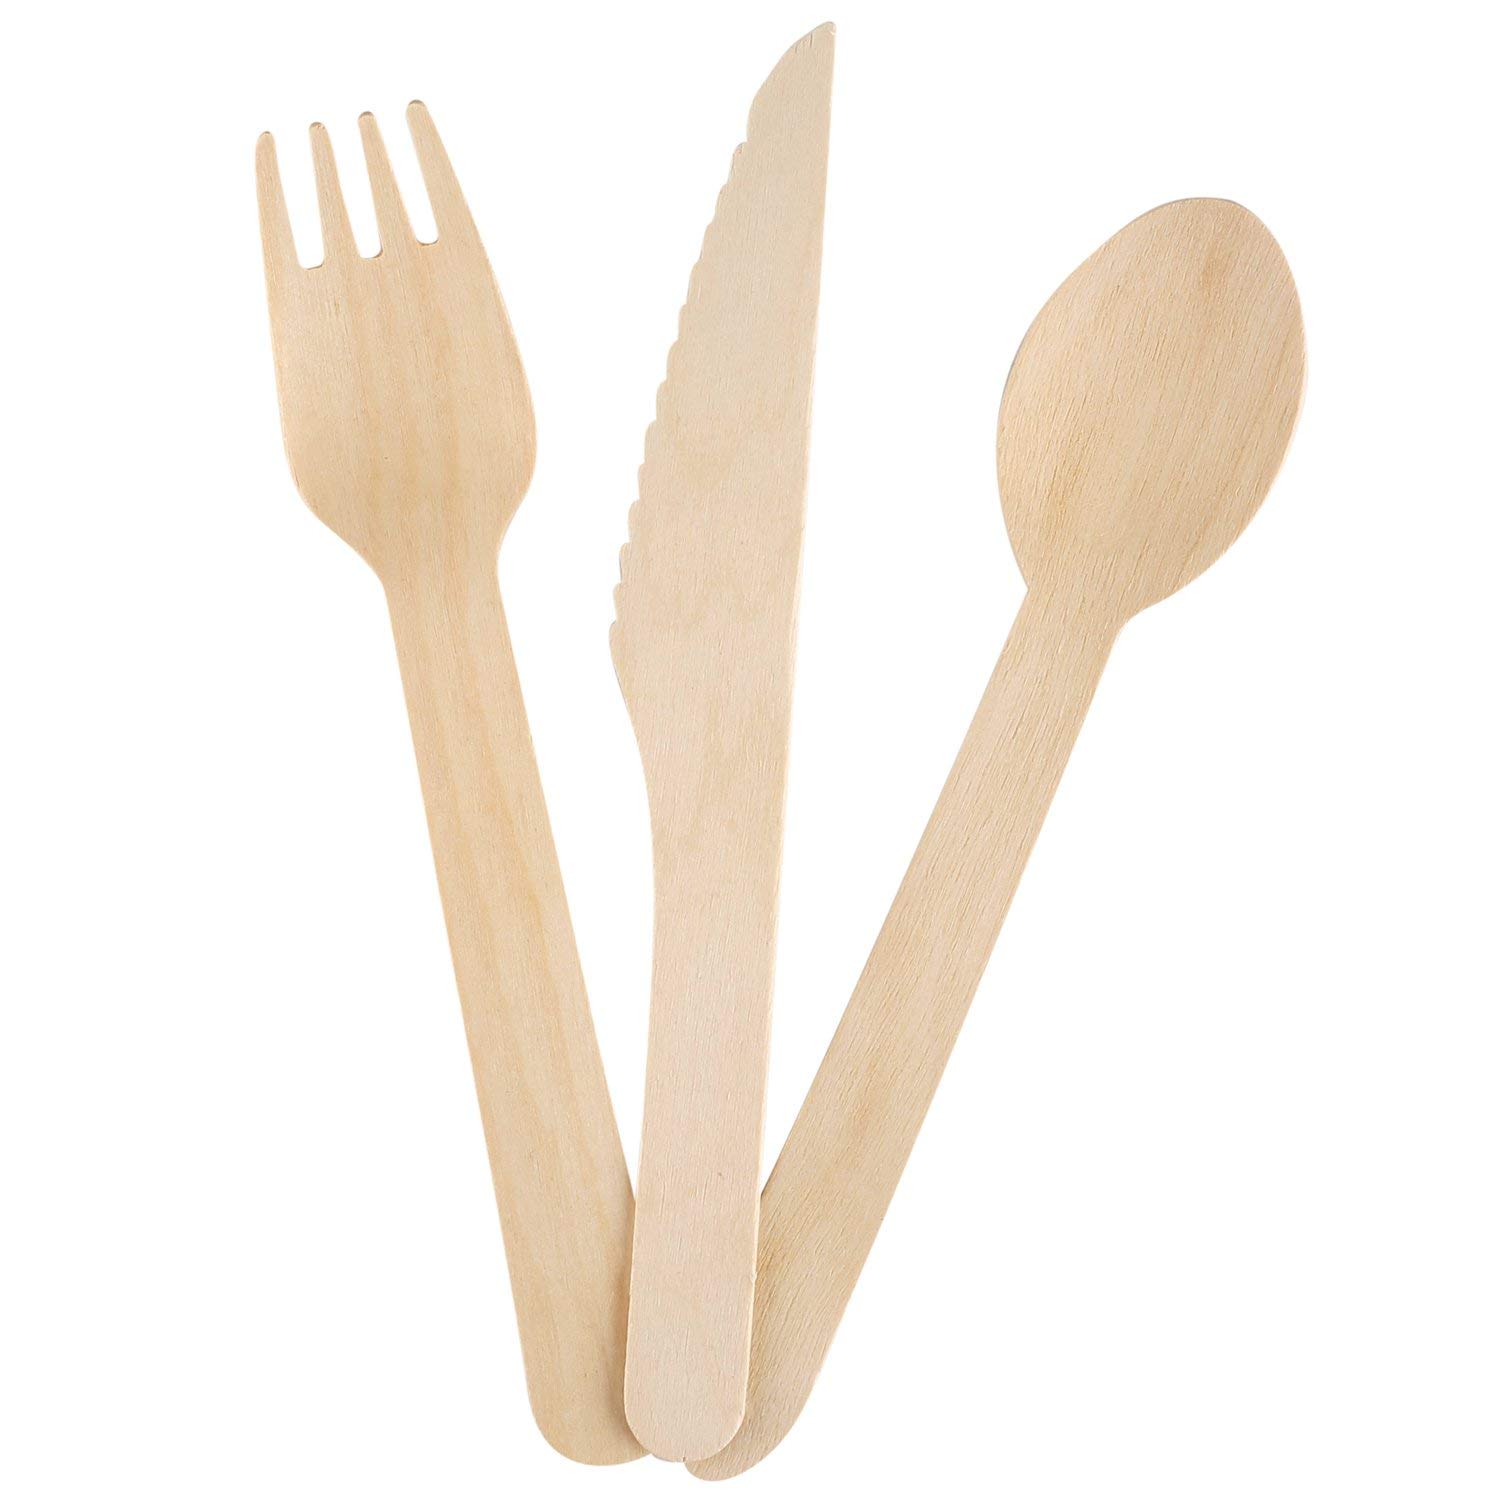 016-Birchwood Wooden Forks Knives Spoon 200 Pc Set - Party Rentals NYC